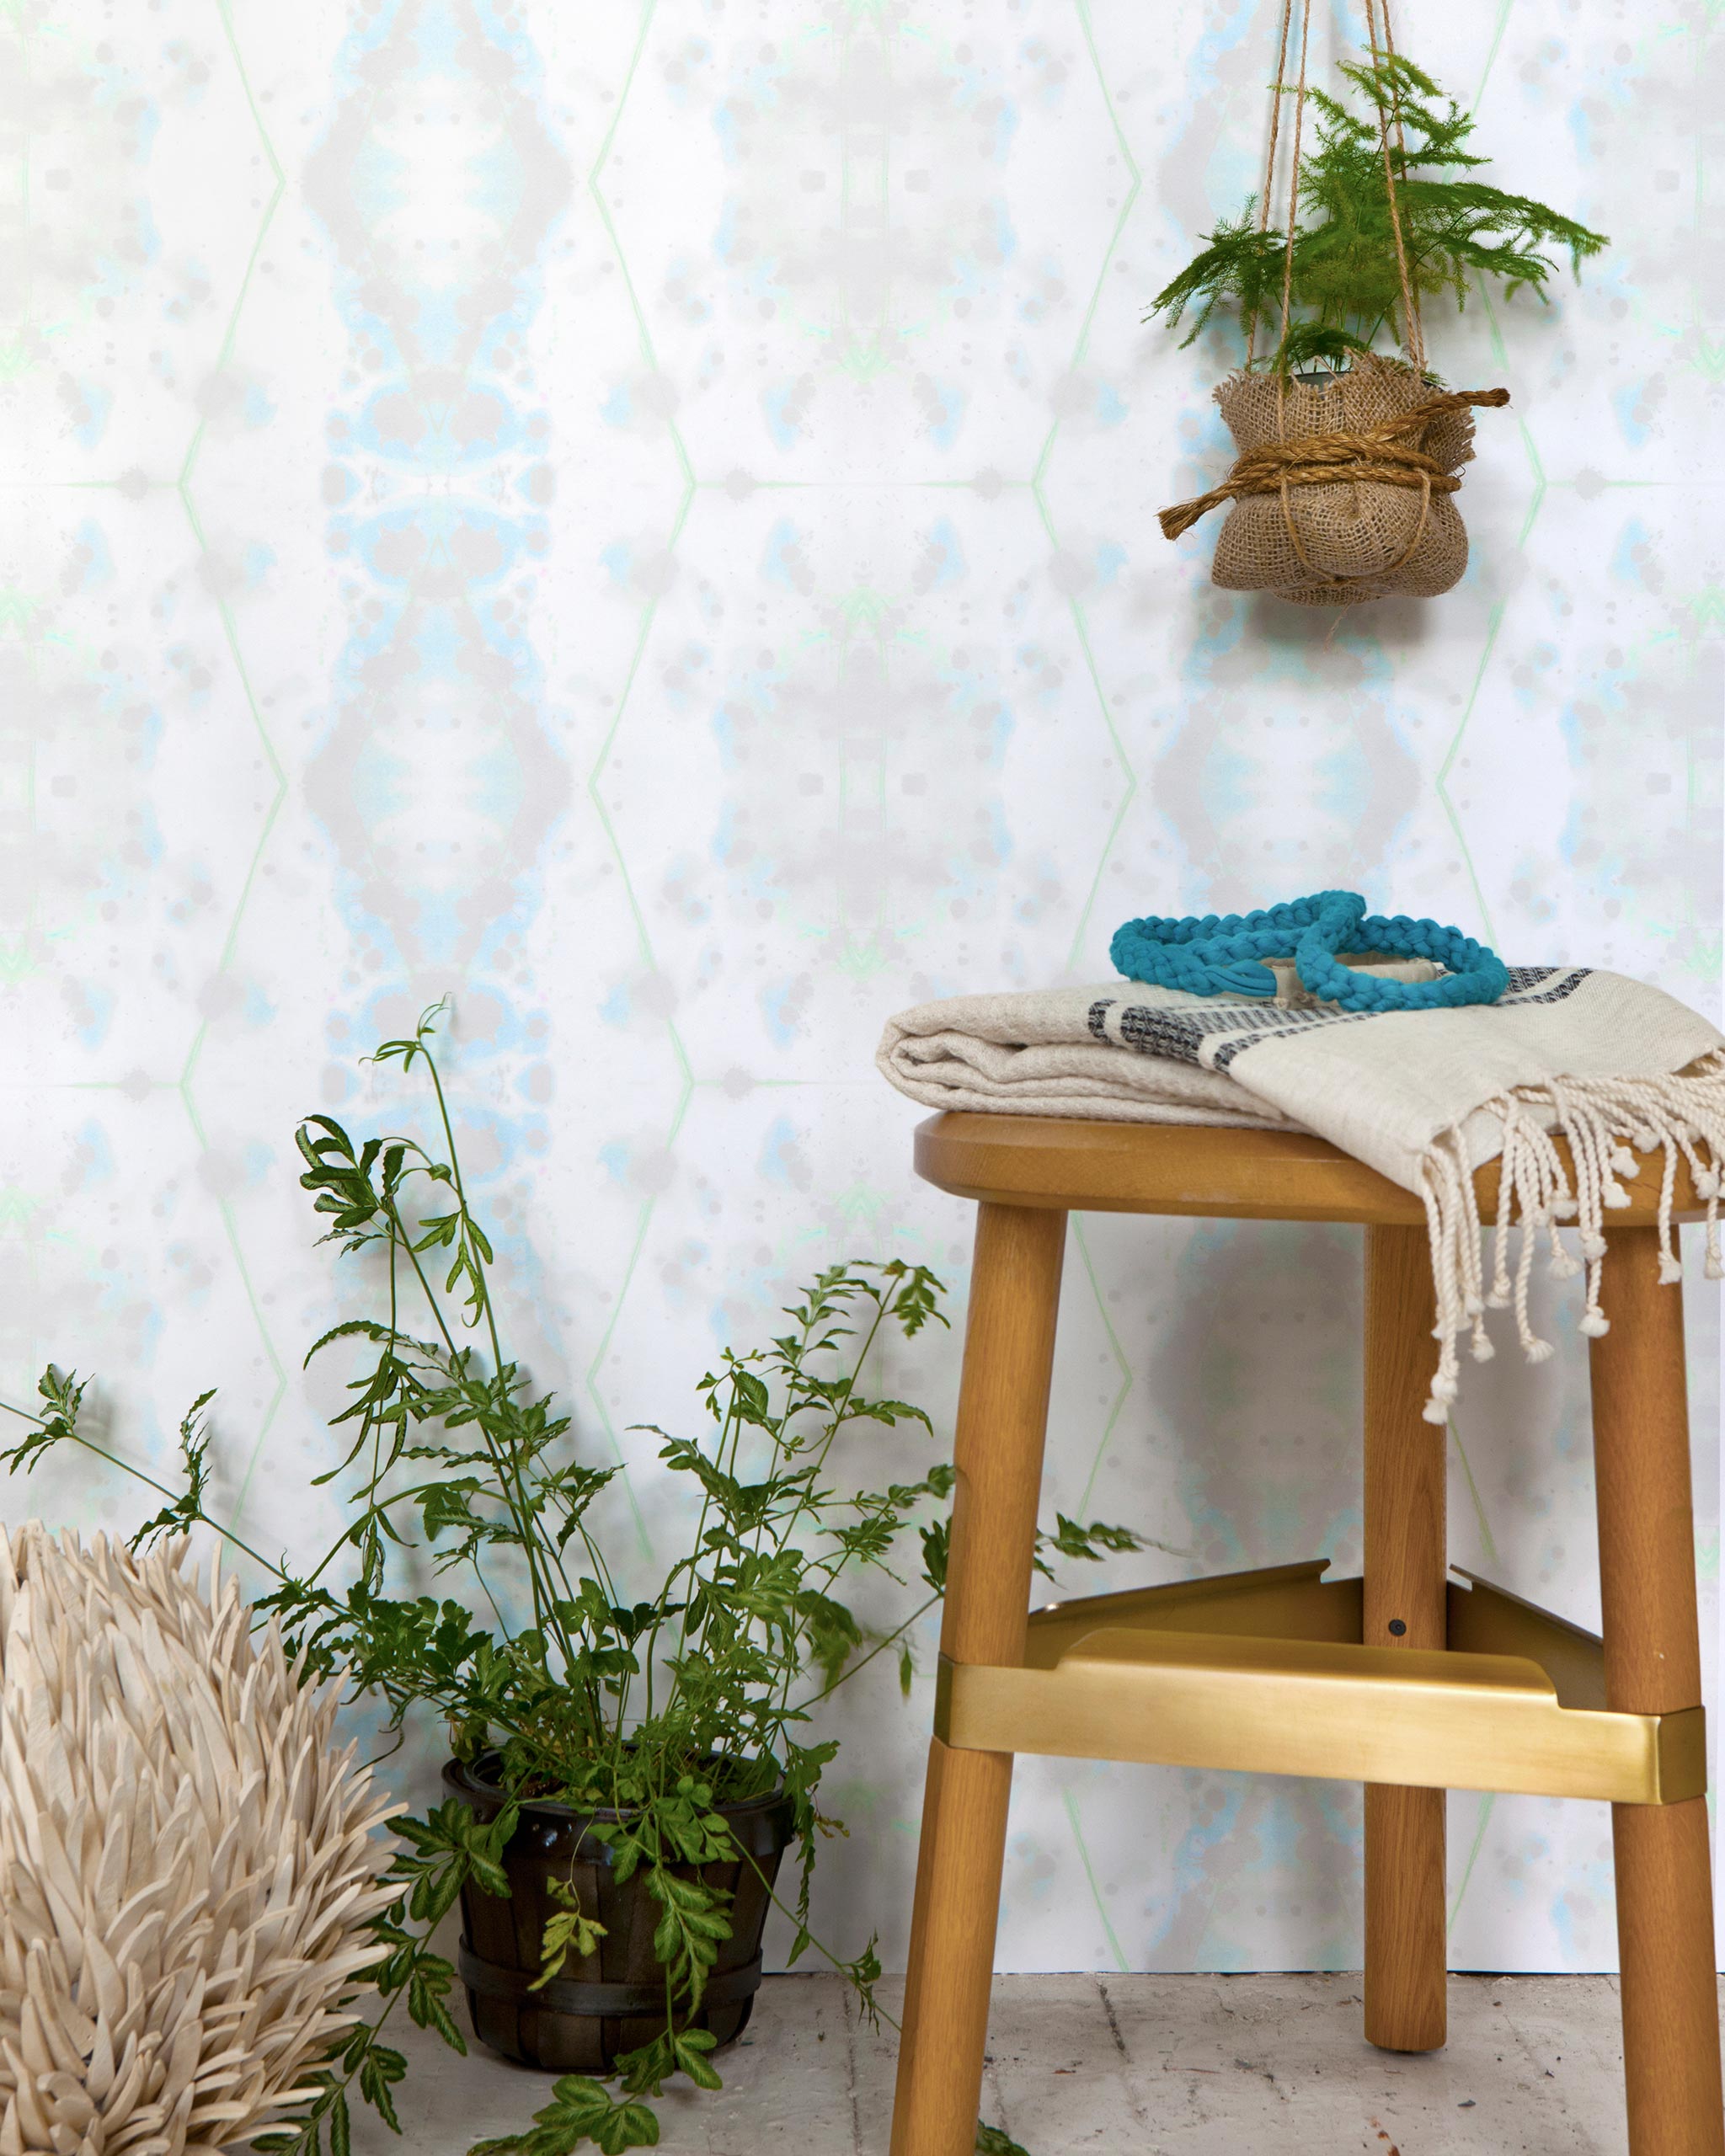 A stool and several plants stand in front of a wall papered in a painterly gometric stripe in gray, blue, green and white.